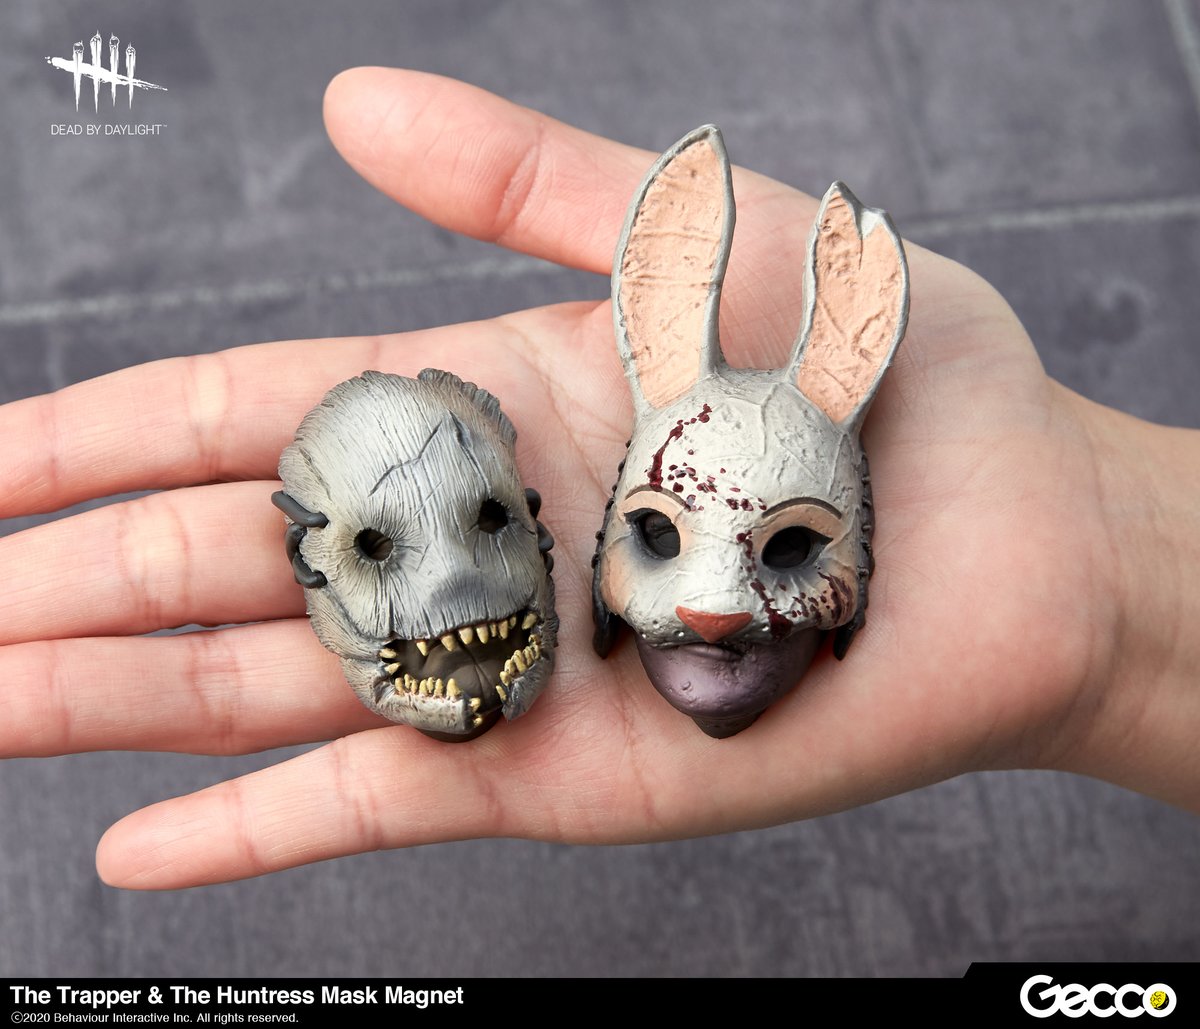 Gecco Corp. on "Dead by Daylight, Trapper &amp; Mask Magnet The face masks of brutal Killers are recreated as figures. Friendly displayable anywhere, but the scary are sculpted